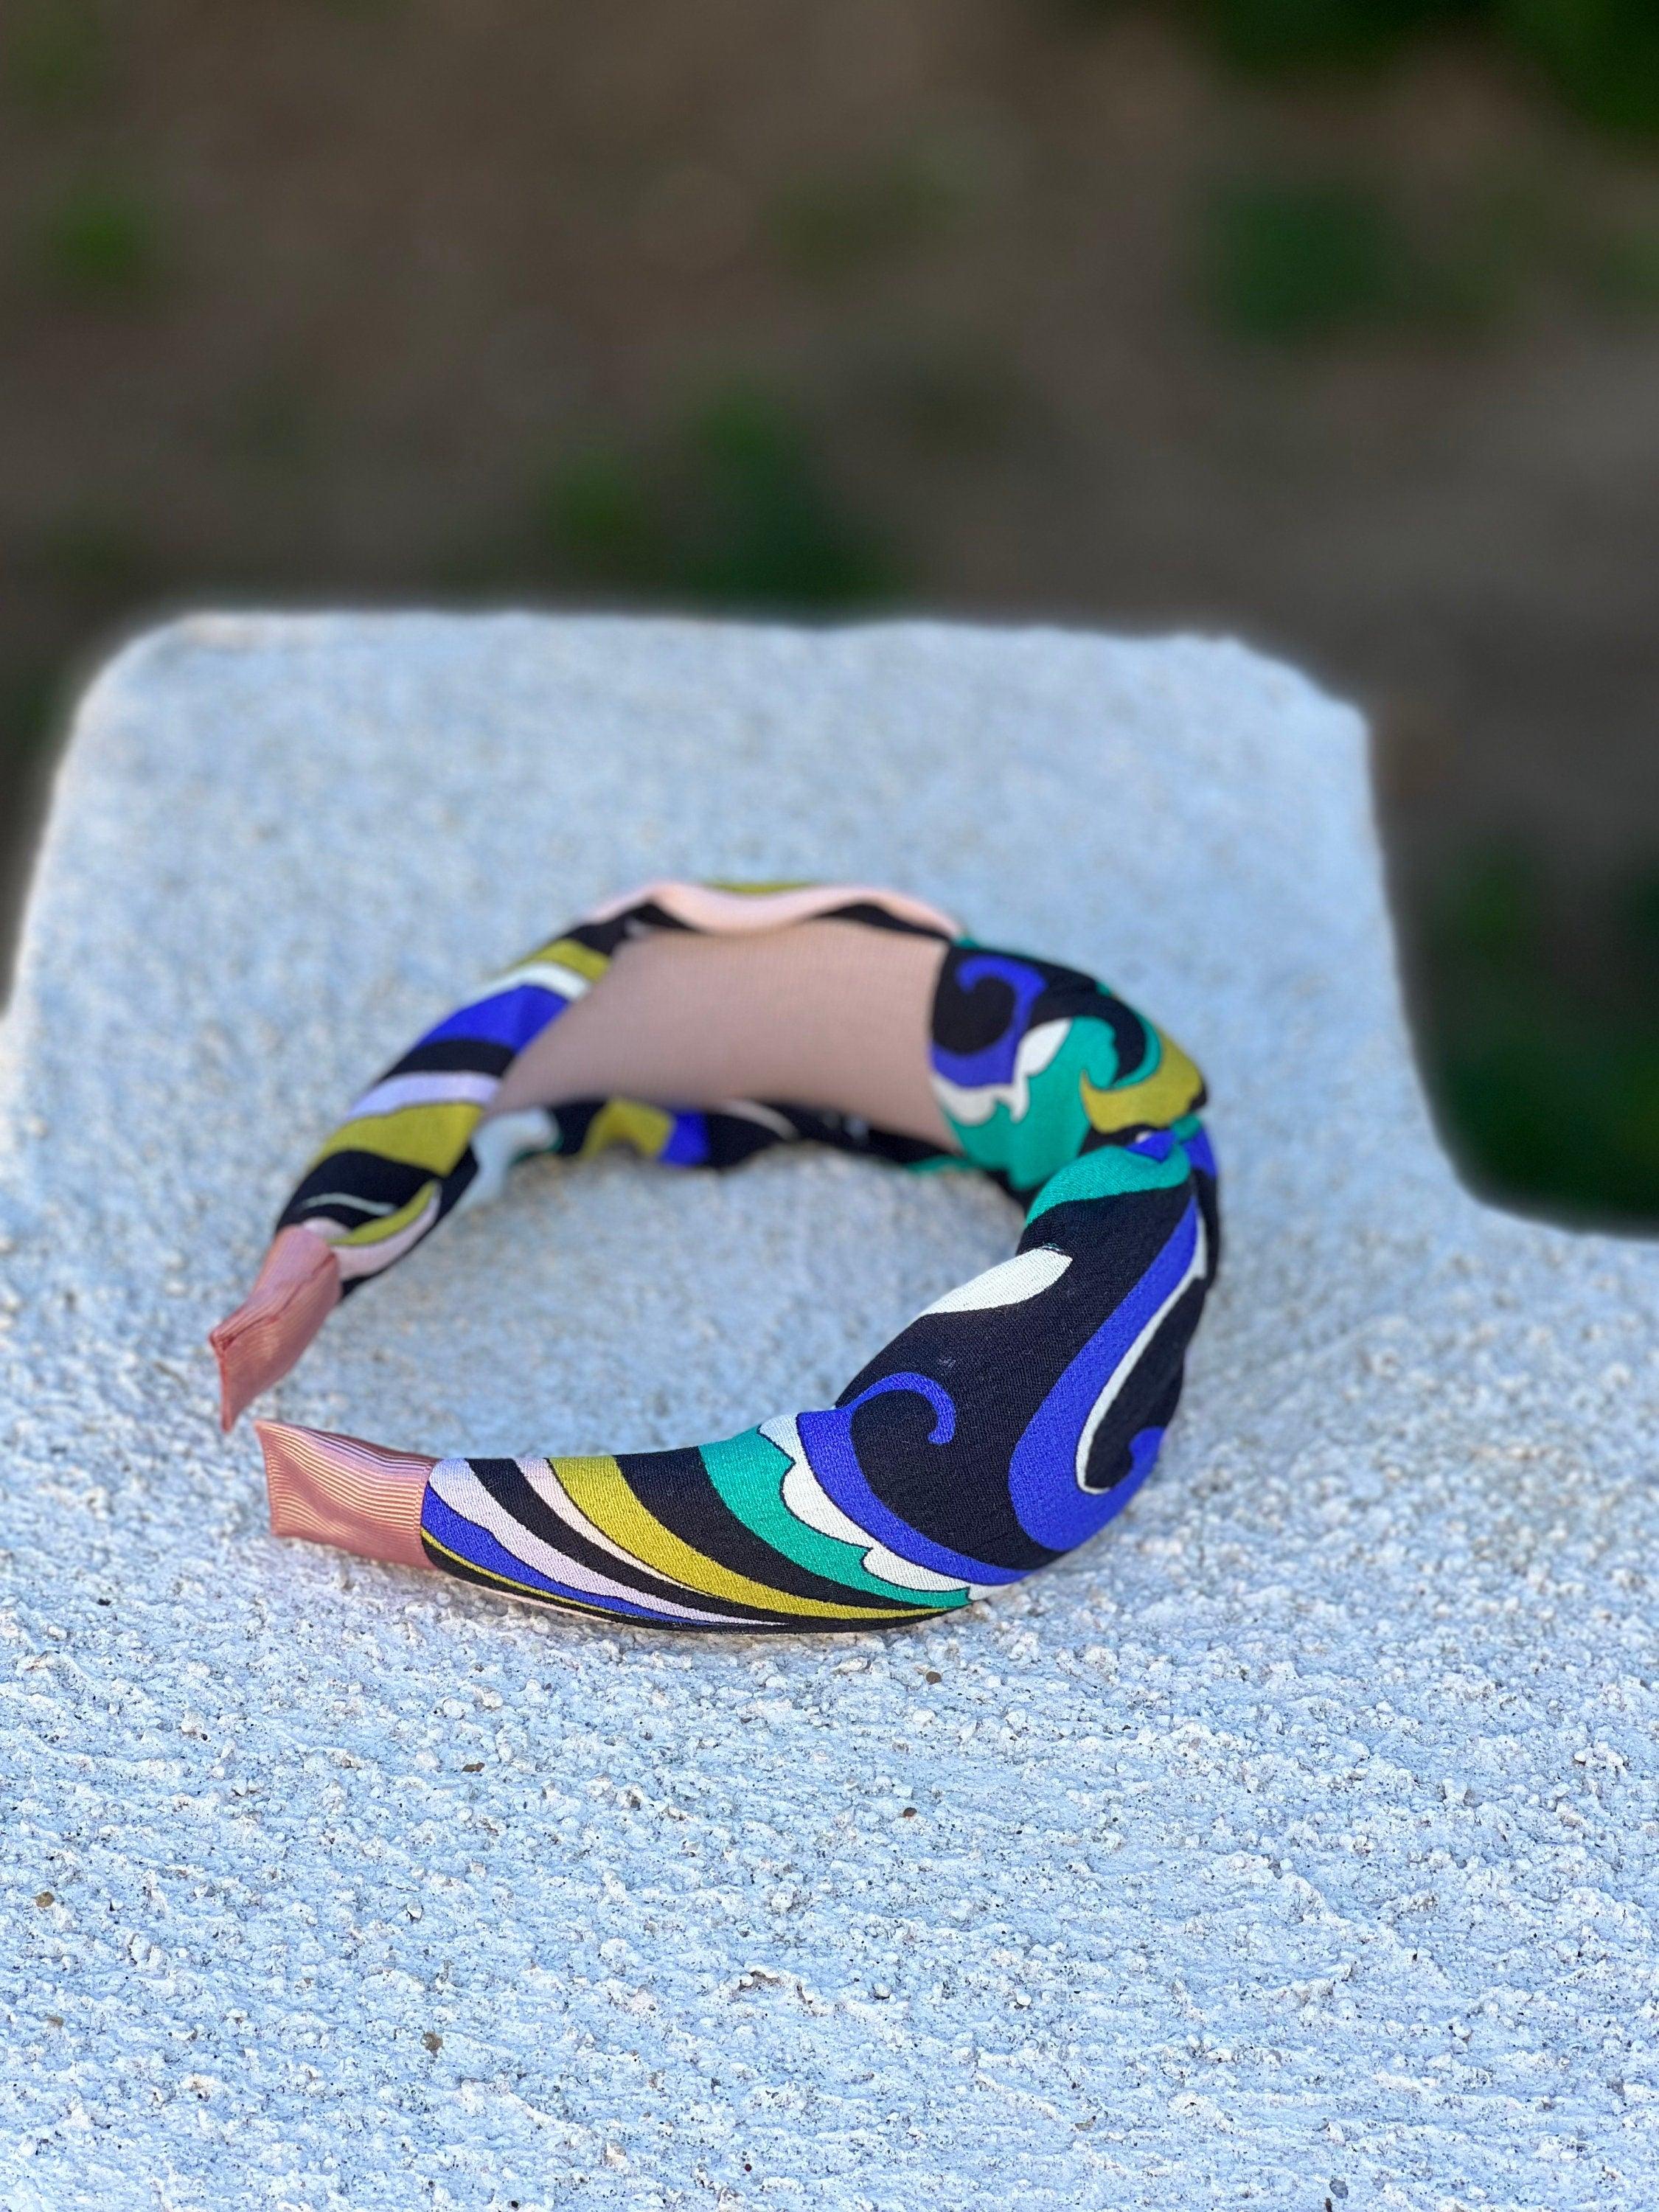 High-Quality Geometric Crepe Knotted Headband for Women - All Season Fashion Hairband in Black, White, Blue, and Green available at Moyoni Design